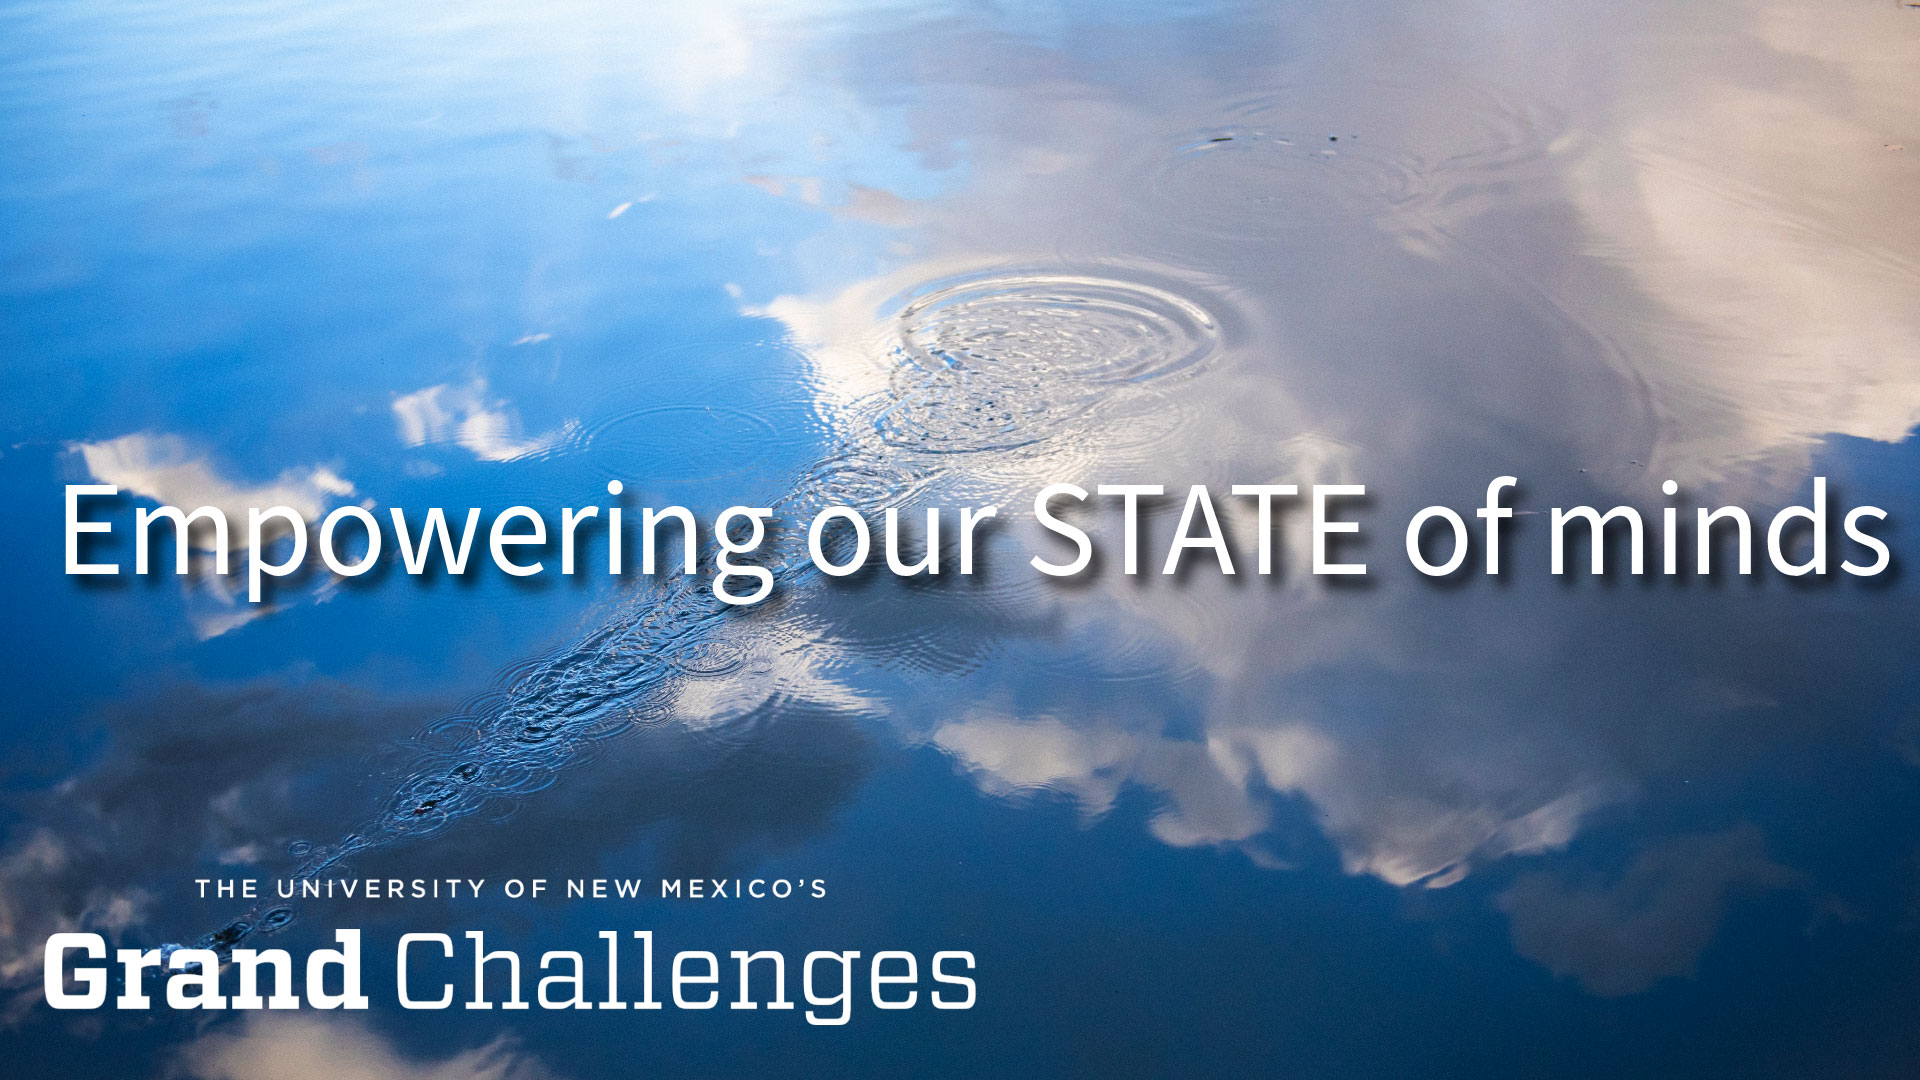  The University of New Mexico announces newest Level 2 Grand Challenges